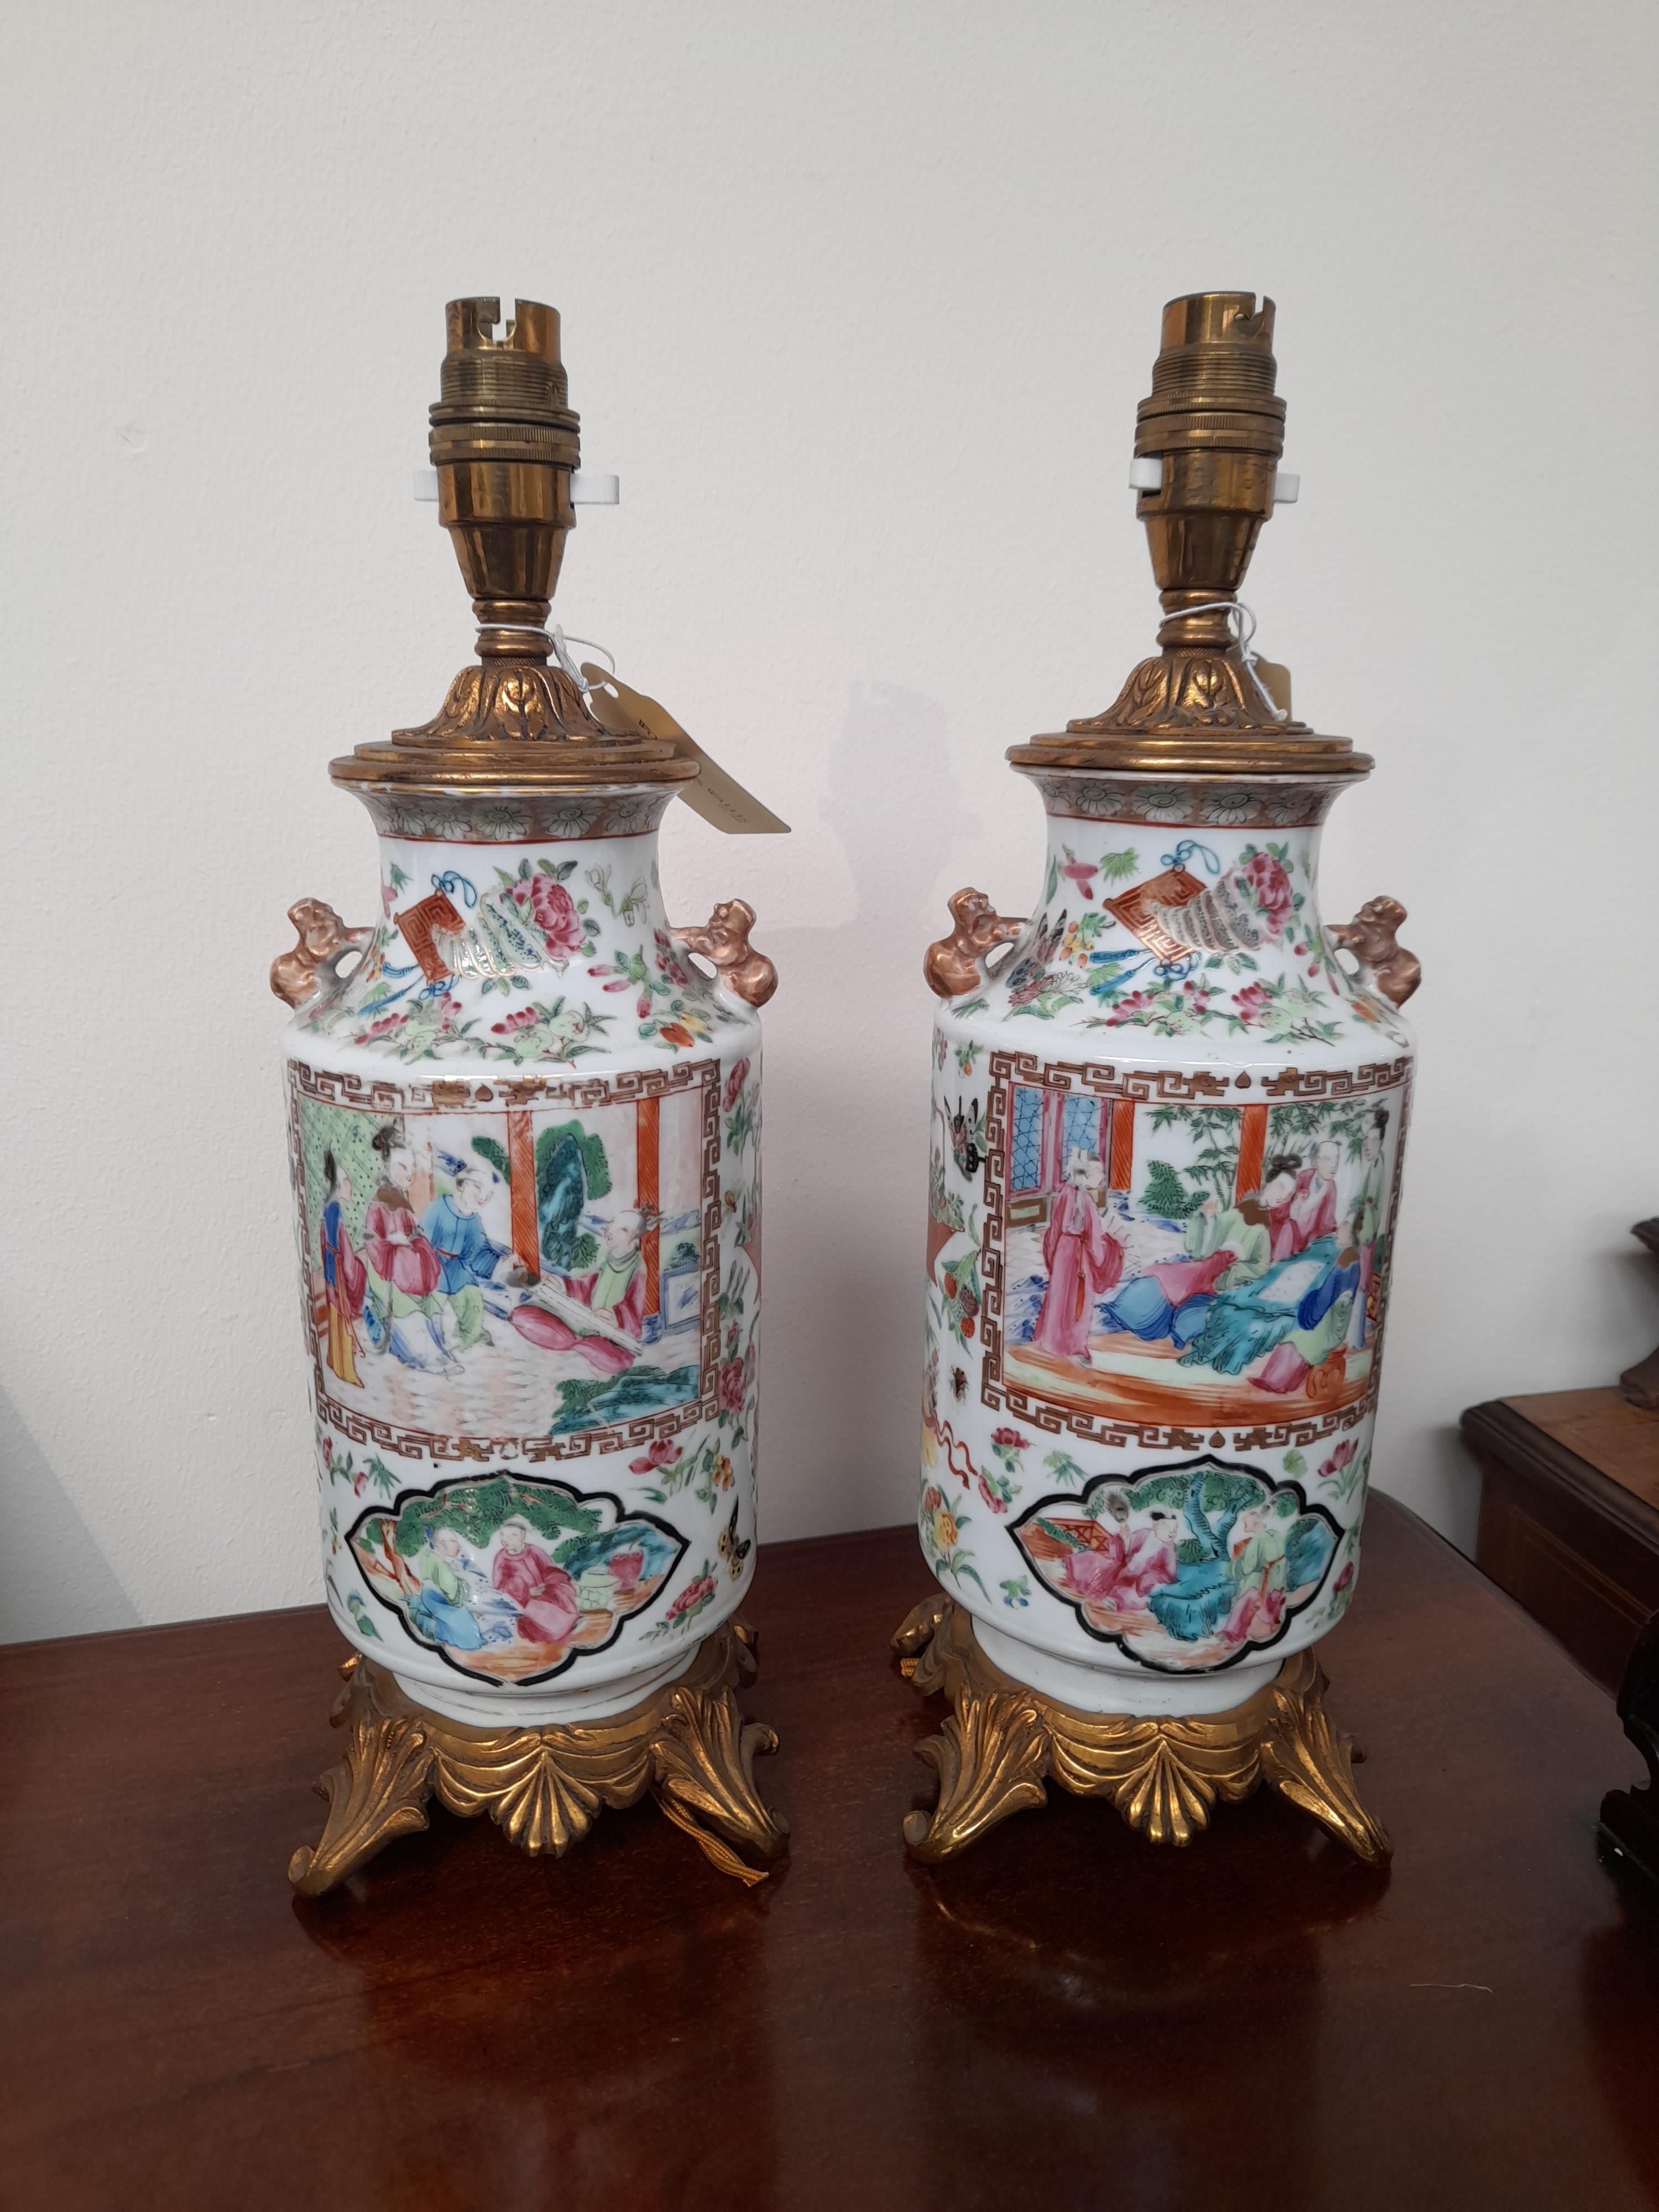 A PAIR OF CHINESE CANTON PORCELAIN FAMILLE ROSE VASE TABLE LAMPS LATE 19TH CENTURY painted with - Image 9 of 9